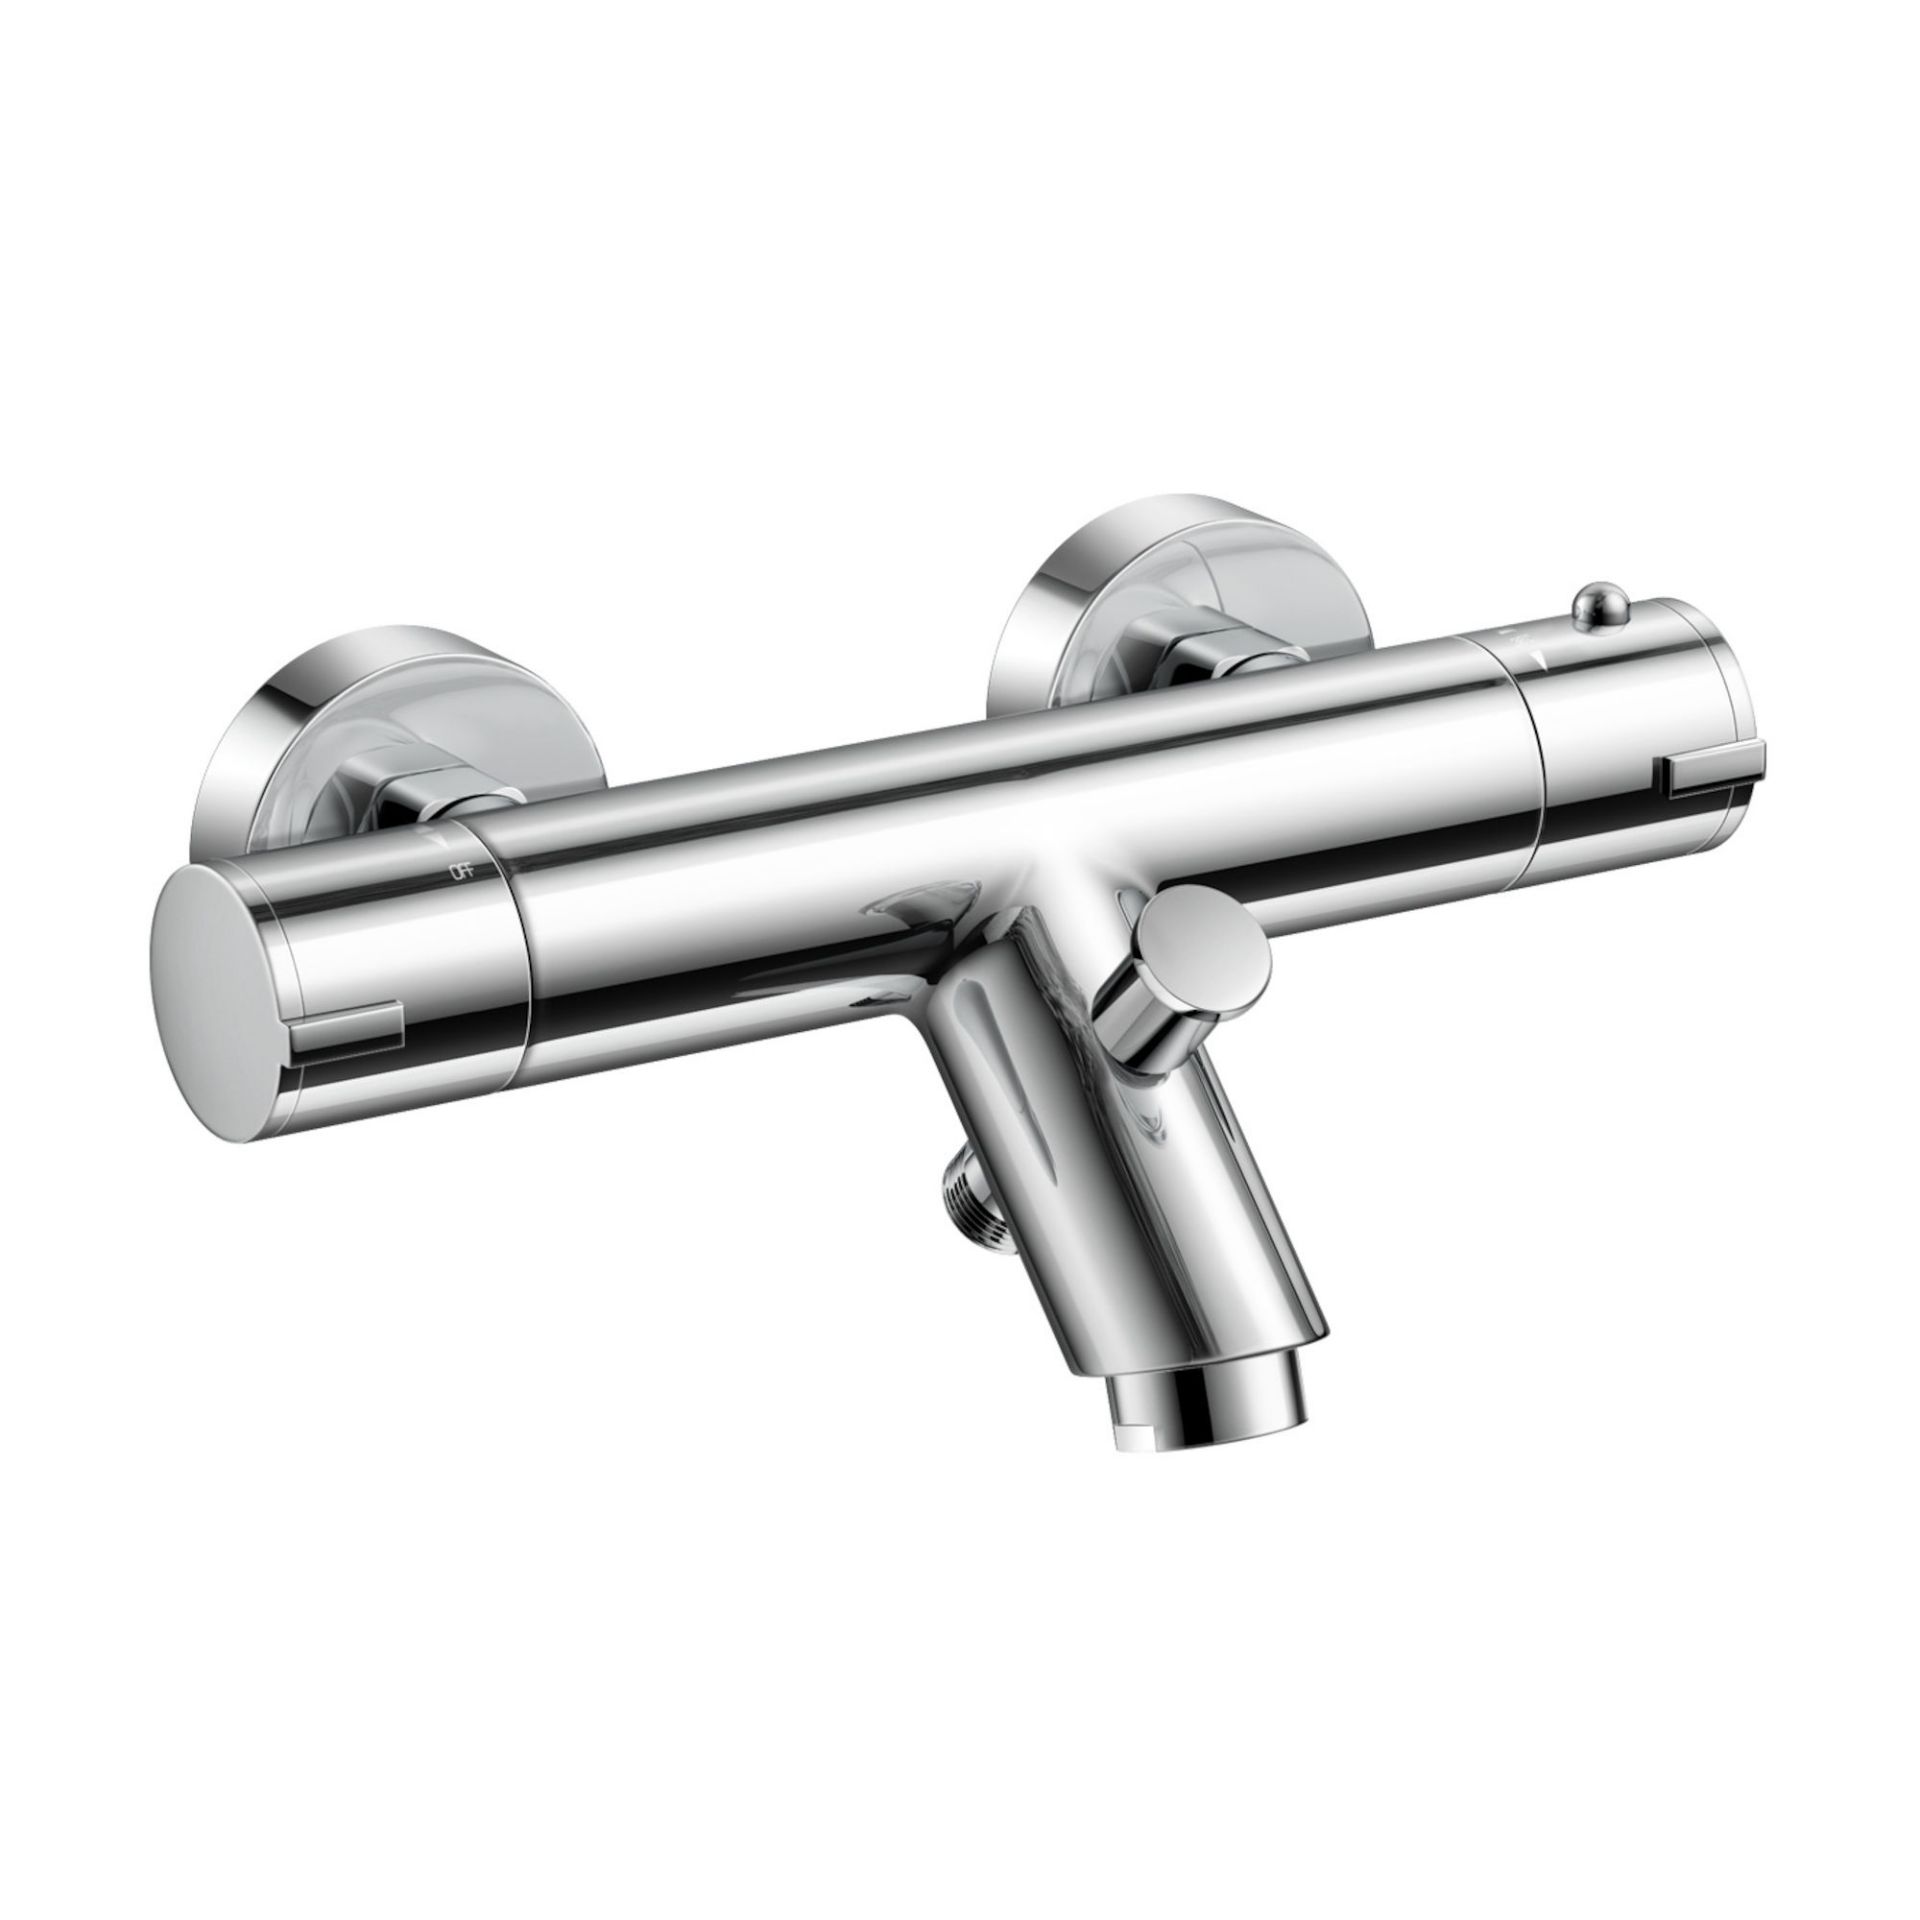 (G51) Slimline Wall Mounted Mixer and Bath Filler Chrome plated solid brass mixer Built in anti-